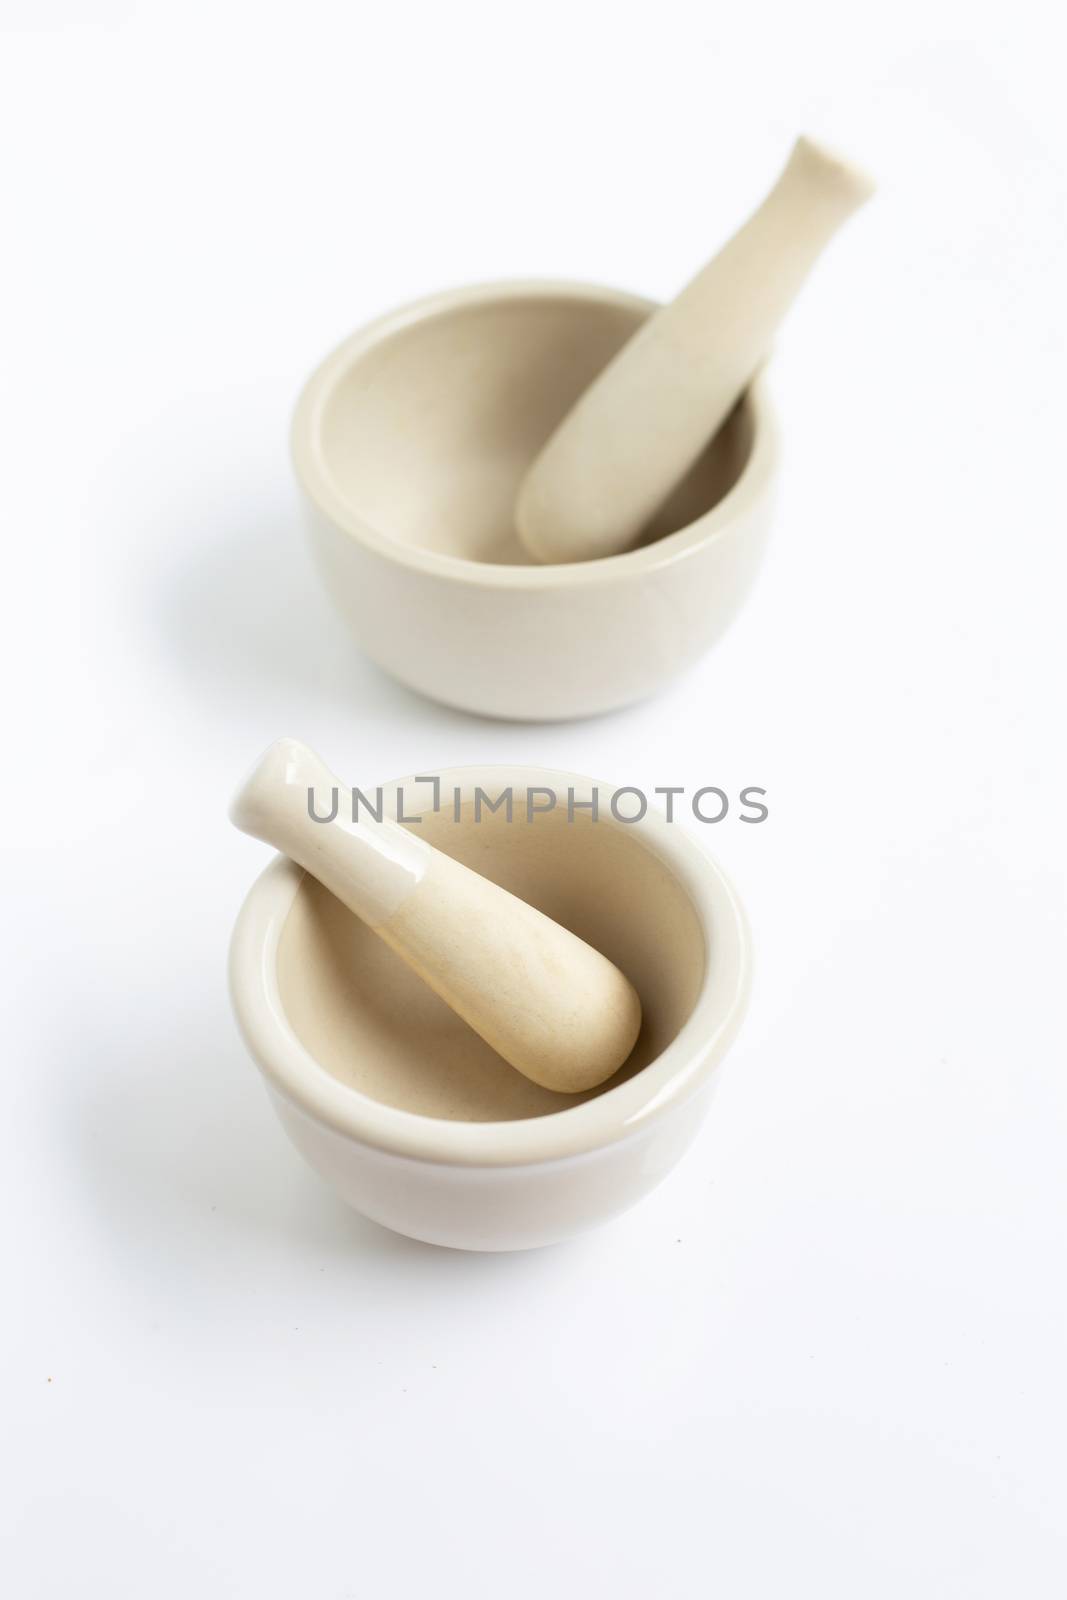 Mortar and pestle on white by Bowonpat